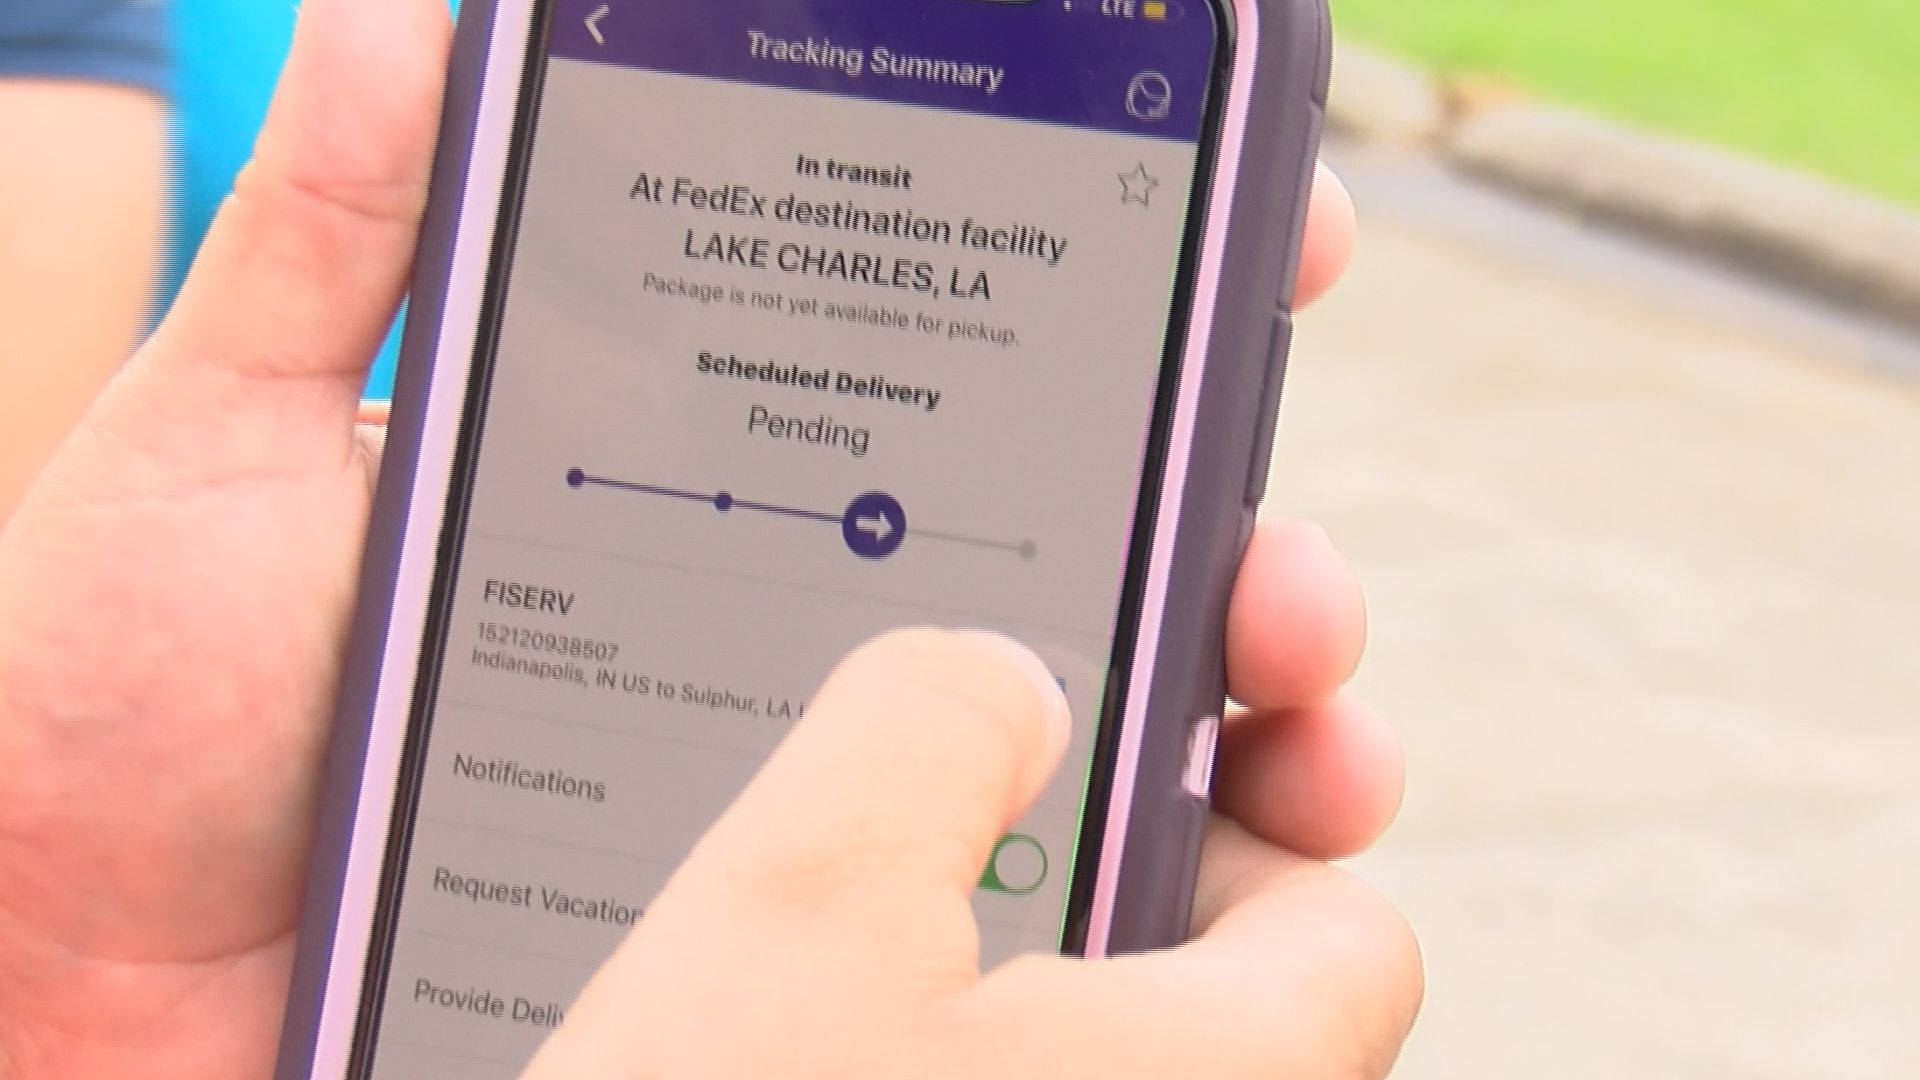 Fedex Tracking Mobile App Background